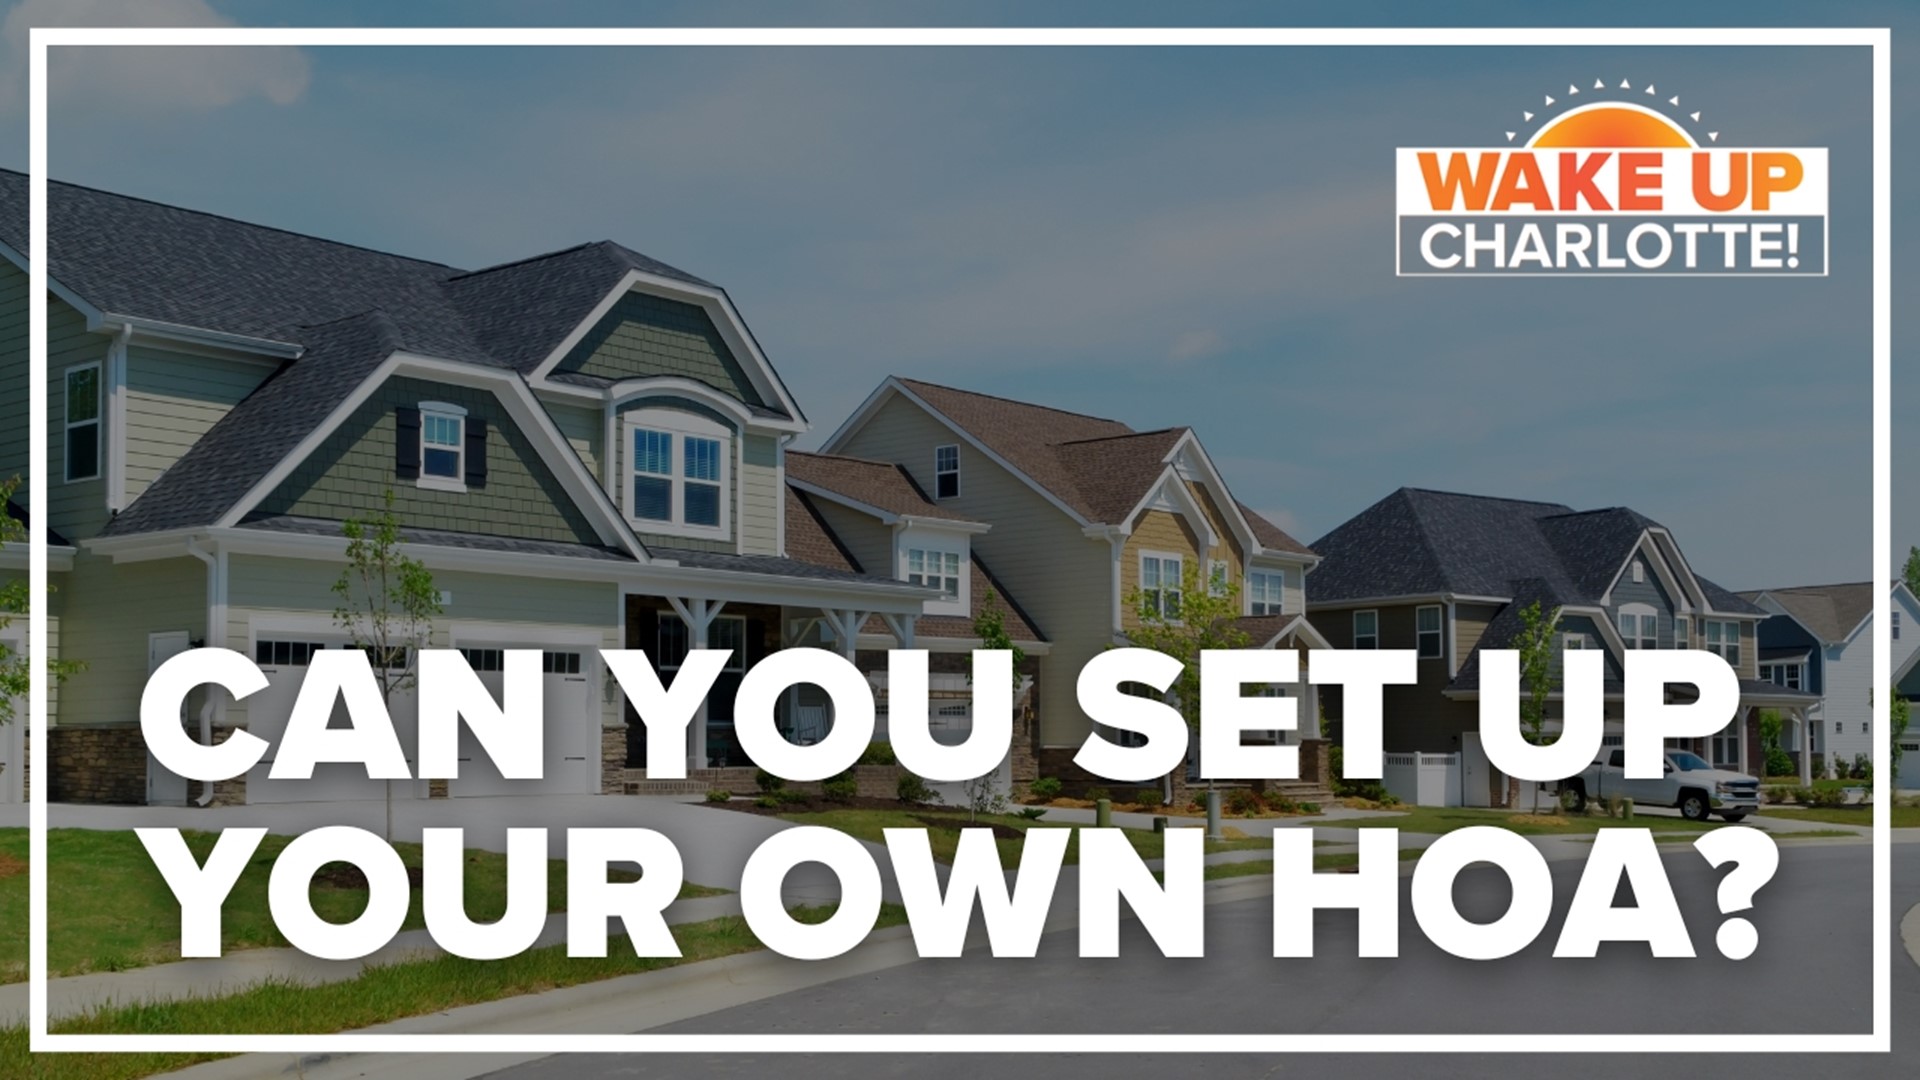 People can start another HOA for their neighborhood, even if they are already in one. However, you can't opt out of your original HOA by forming your own.